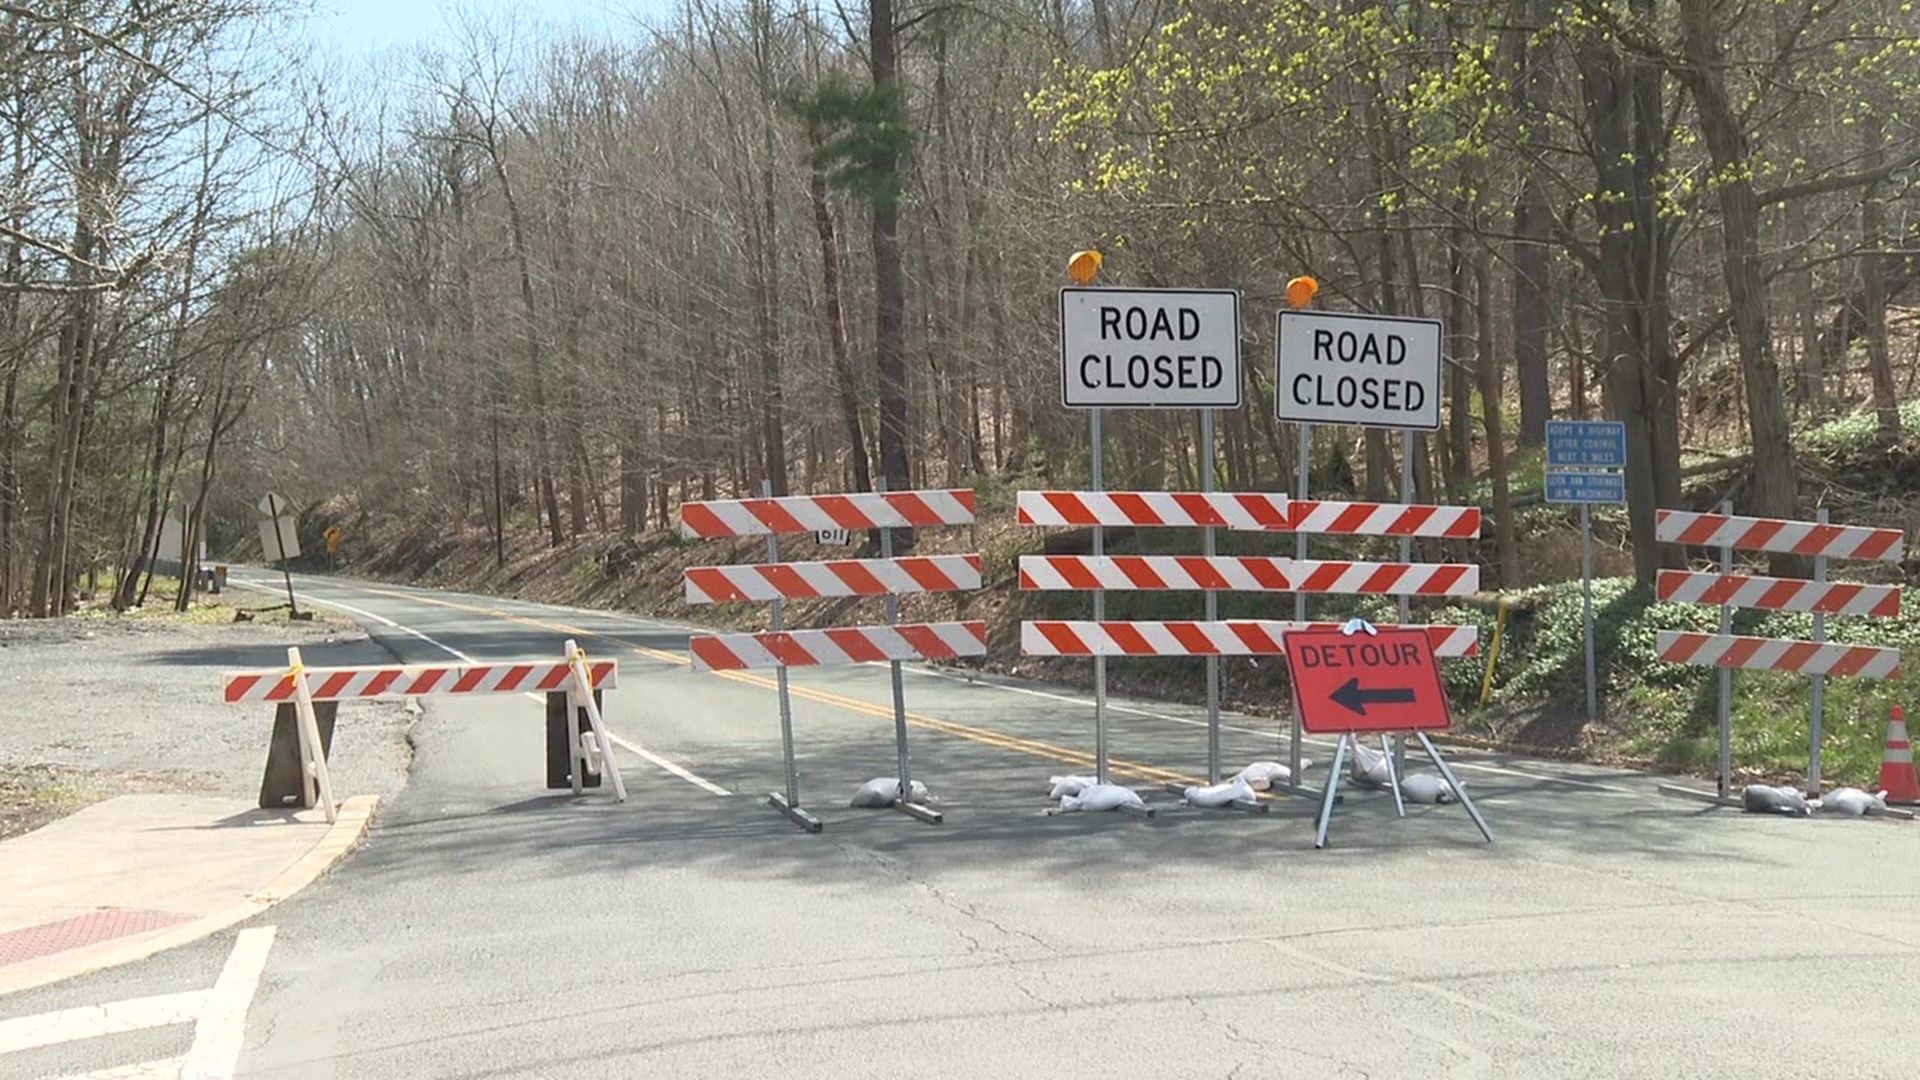 Three miles of Route 611 are closed; business owners in the area want people to know they're open.